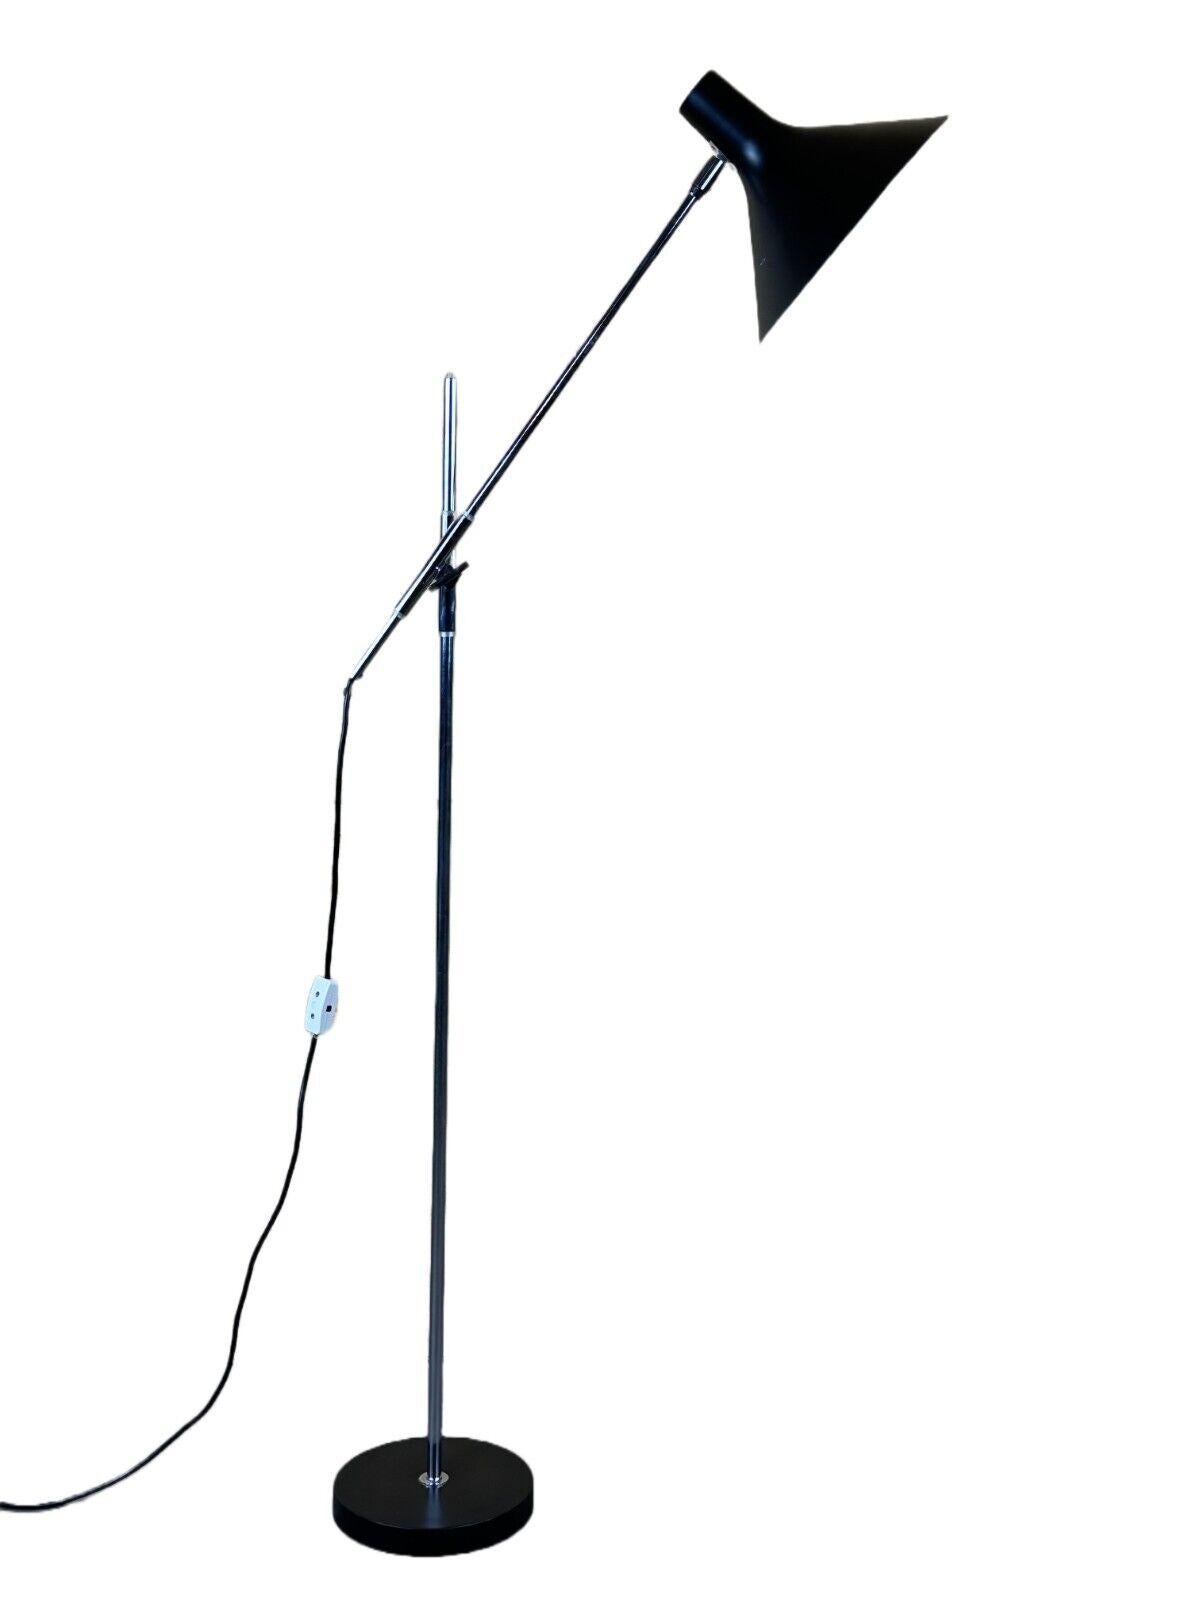 60s 70s adjustable 8180 floor lamp by Karl-Heinz Kinsky for Cosack

Object: floor lamp

Manufacturer: Cosack

Condition: good - vintage

Age: around 1960-1970

Dimensions:

Width = 60cm
Depth = 29cm
Height = 153cm

Material: metal, plastic

Other